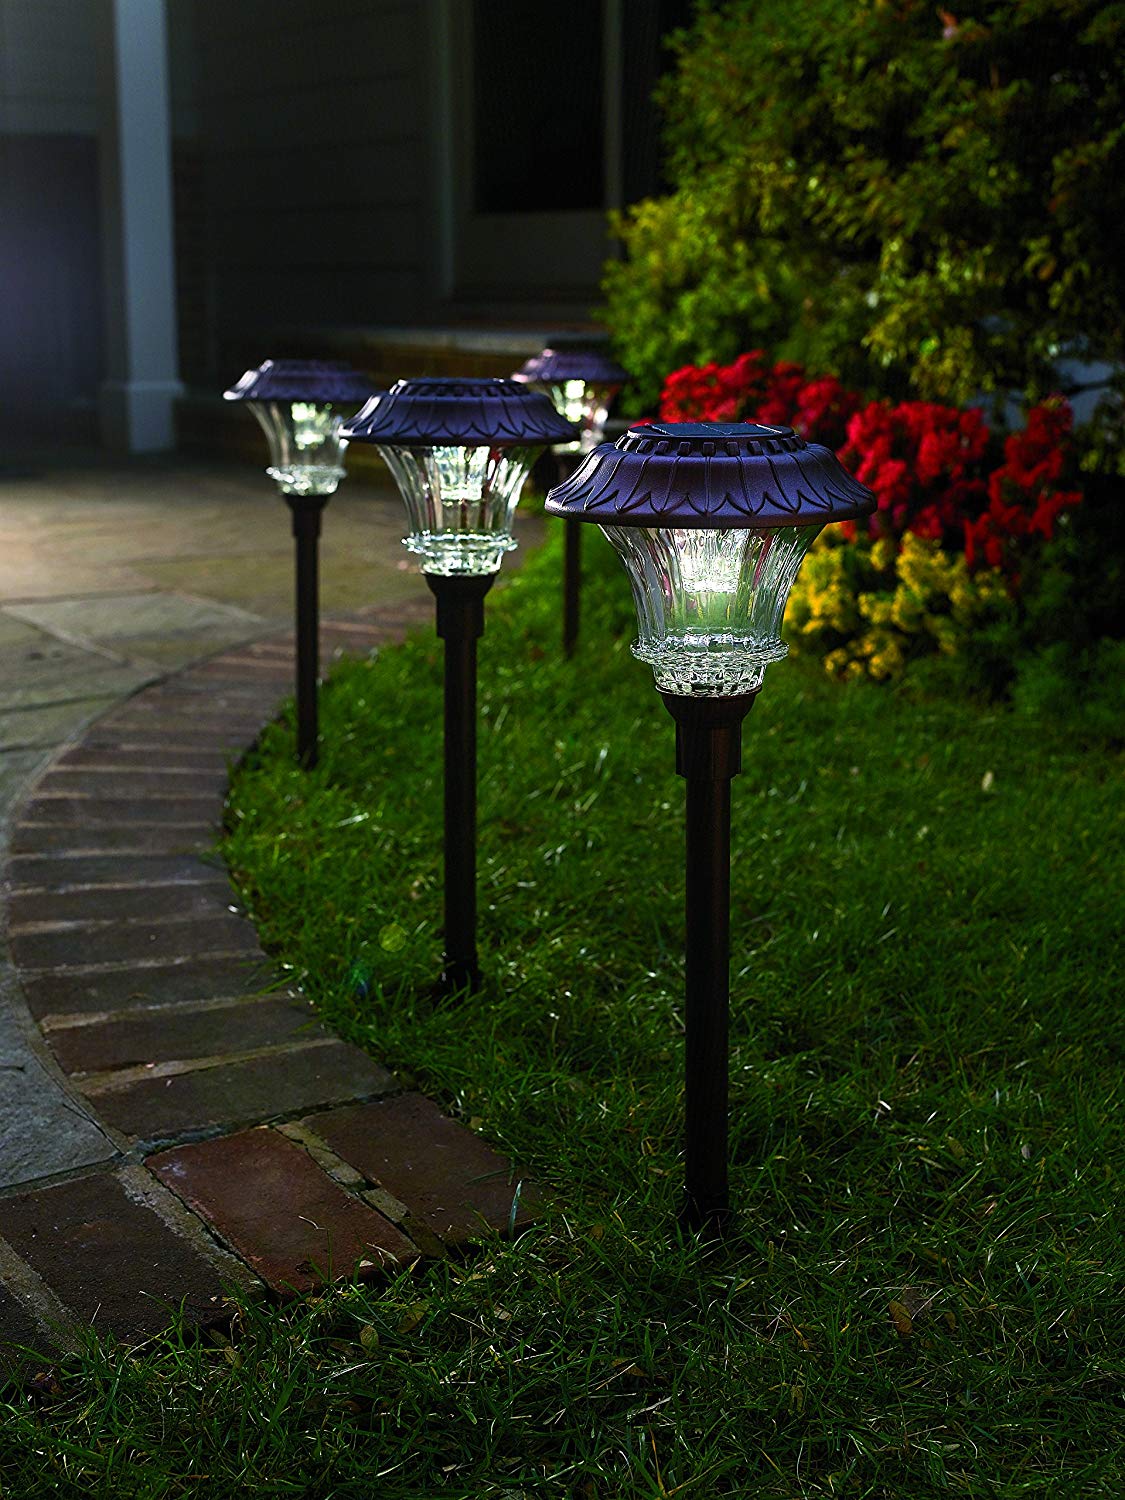 Top 10 Best Solar Path Lights in 2020 Reviews